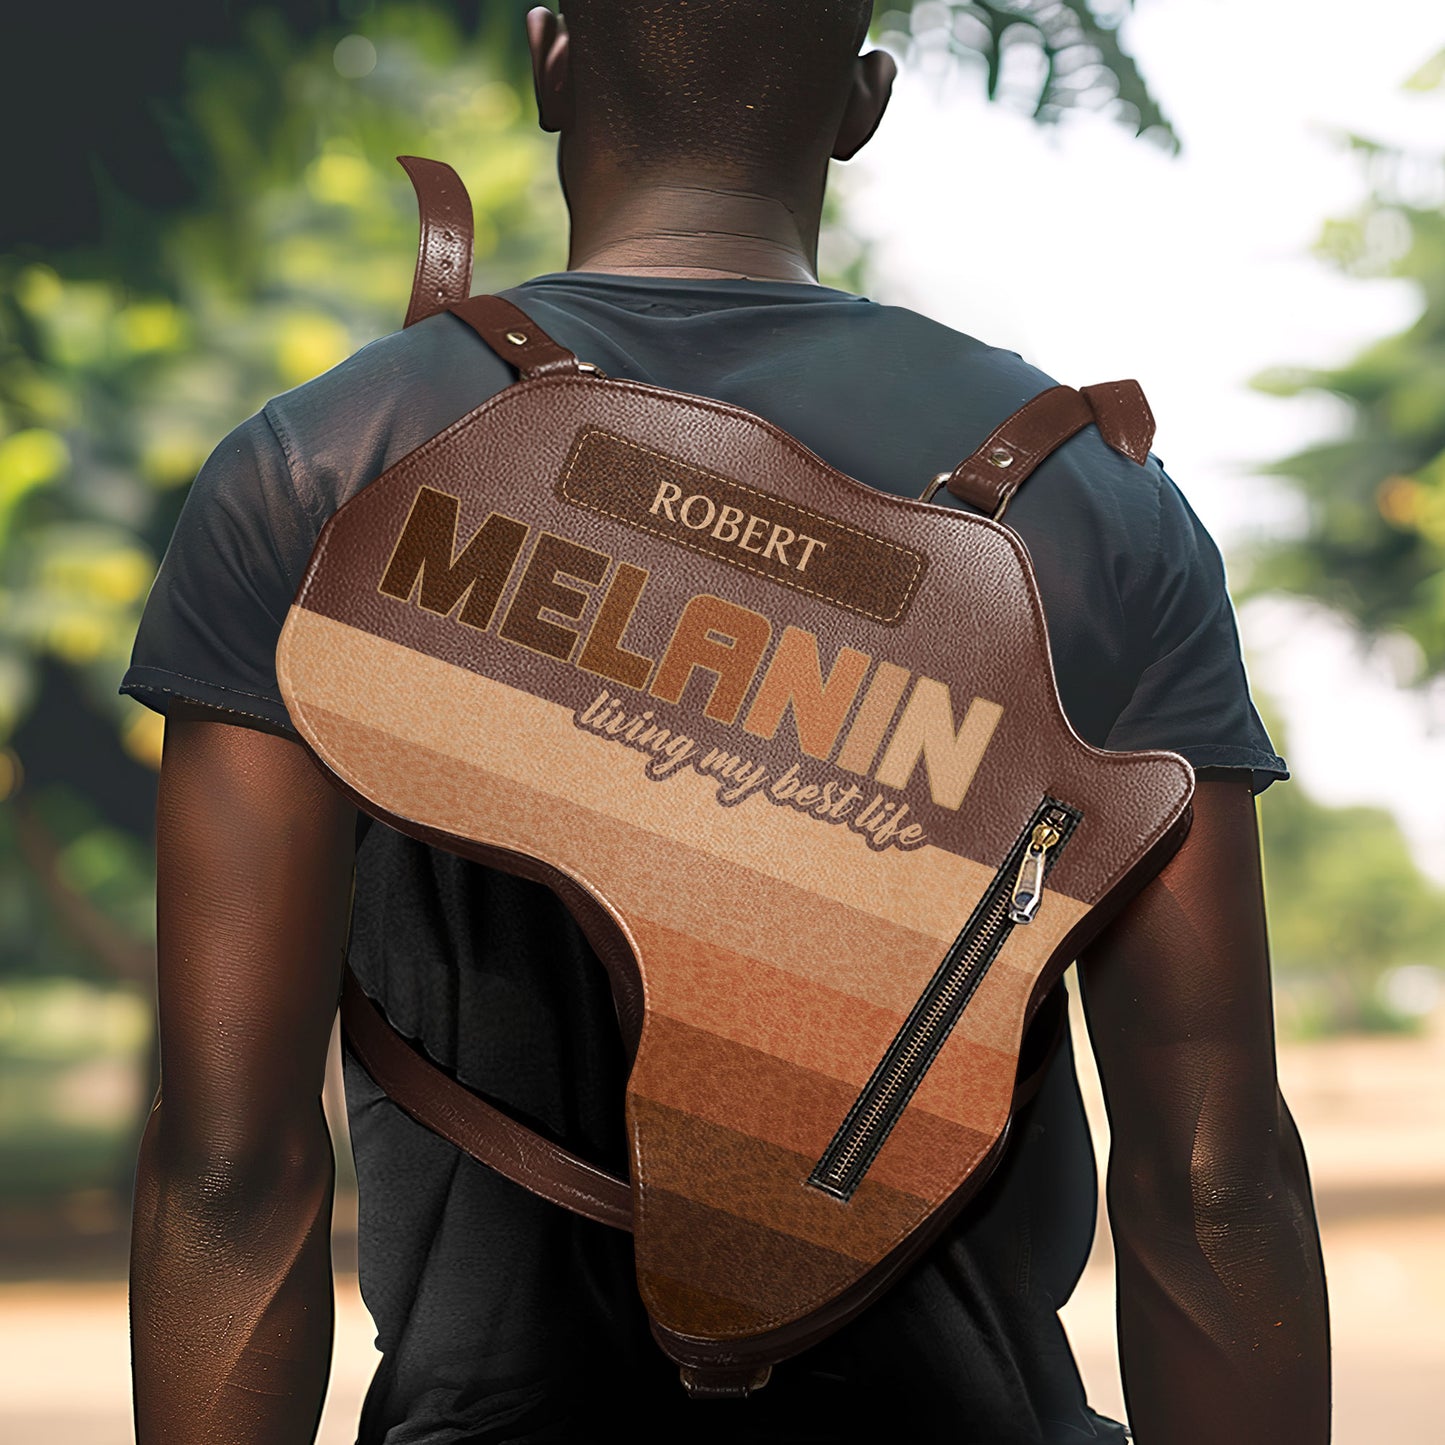 MELANIN - Living My Best Life - Personalized Africa Bag AB04